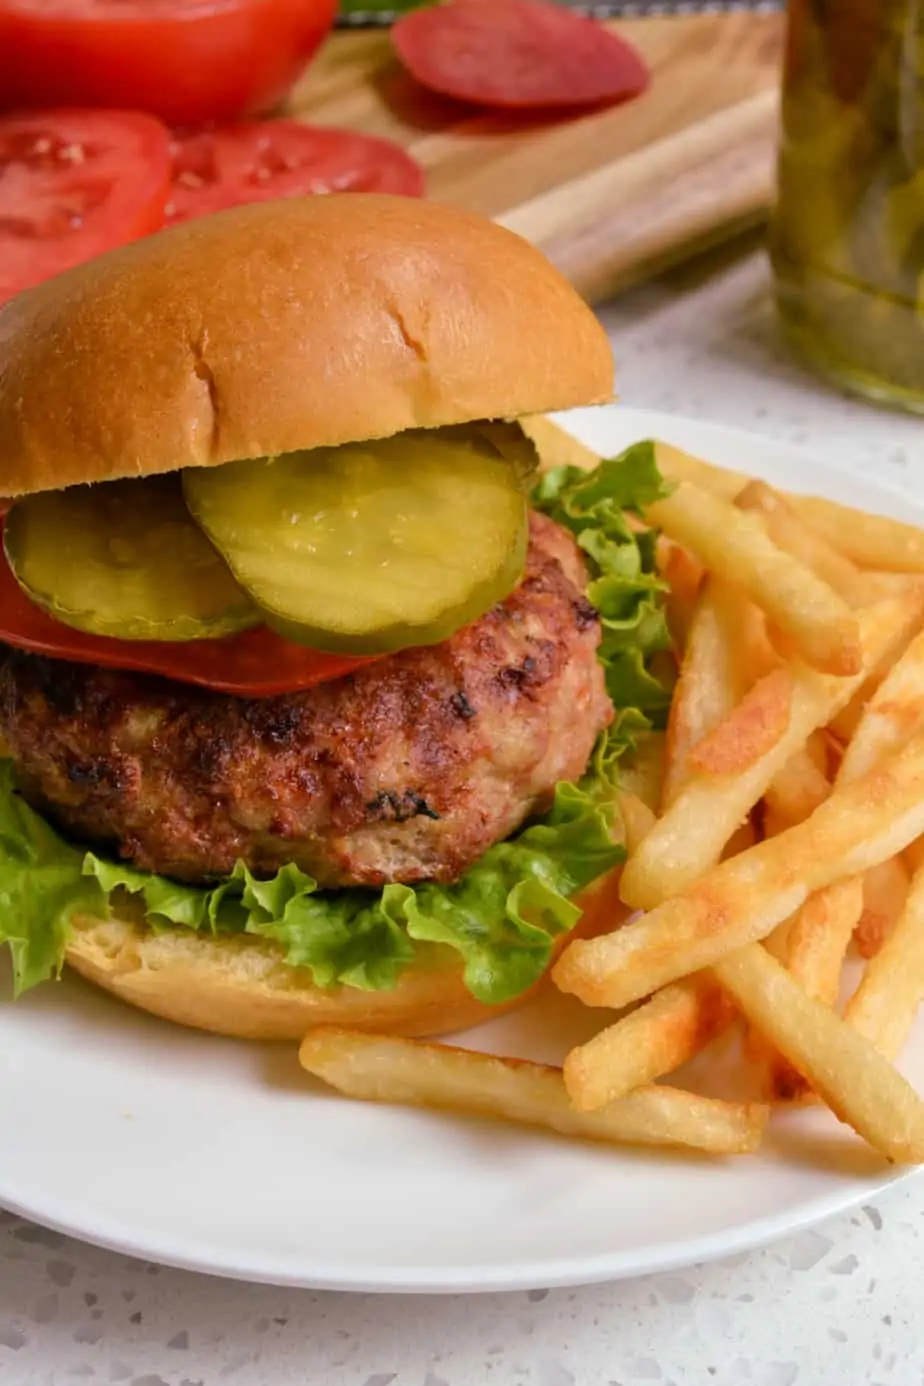 Turkey burger with lettuce, tomato, and pickles. 